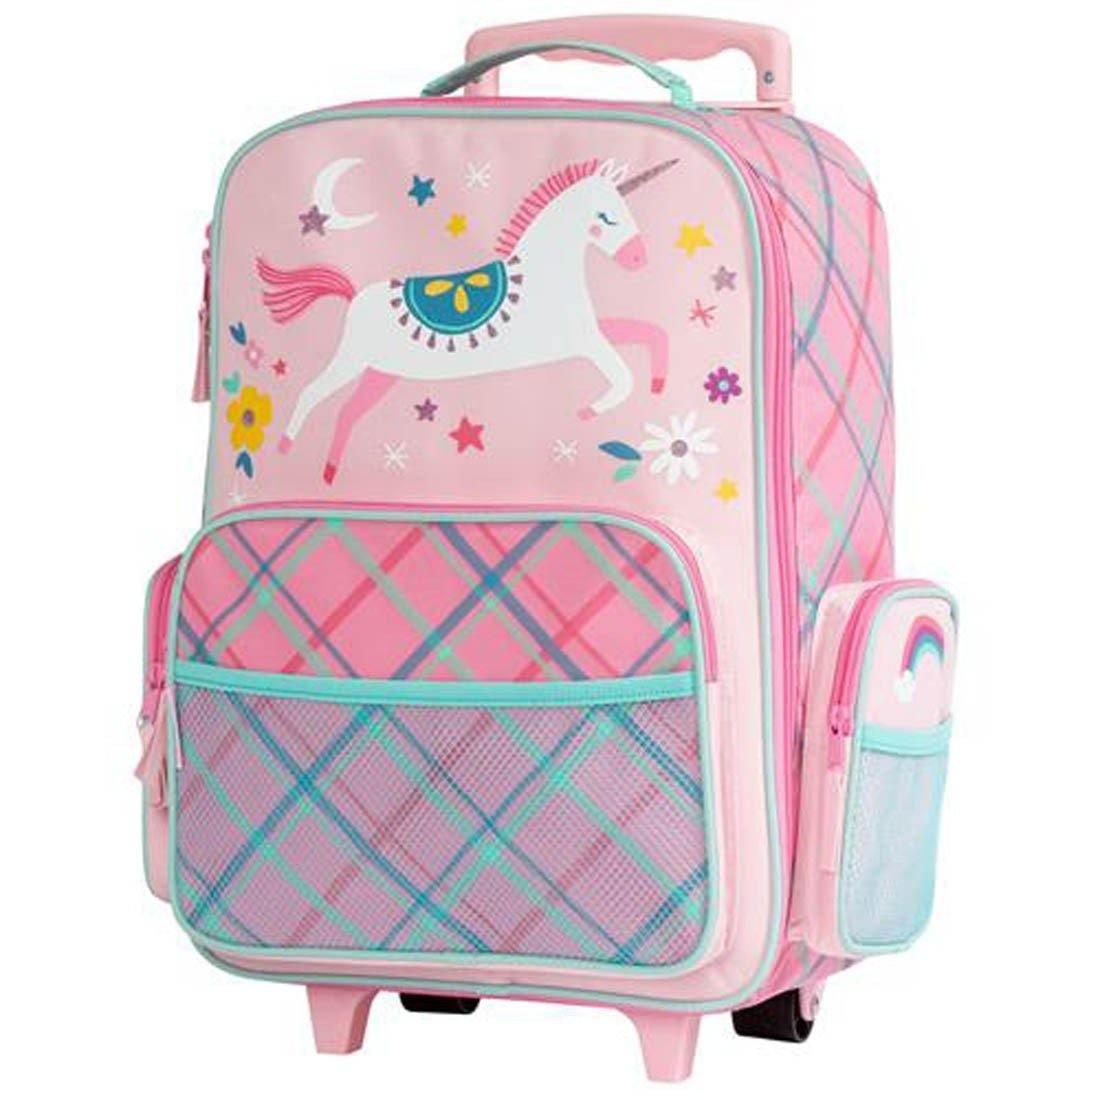 Stephen Joseph Classic Rolling Luggage 18 inch Pink Unicorn - BumbleToys - 5-7 Years, Backpack, Cecil, Girls, Pre-Order, School Supplies